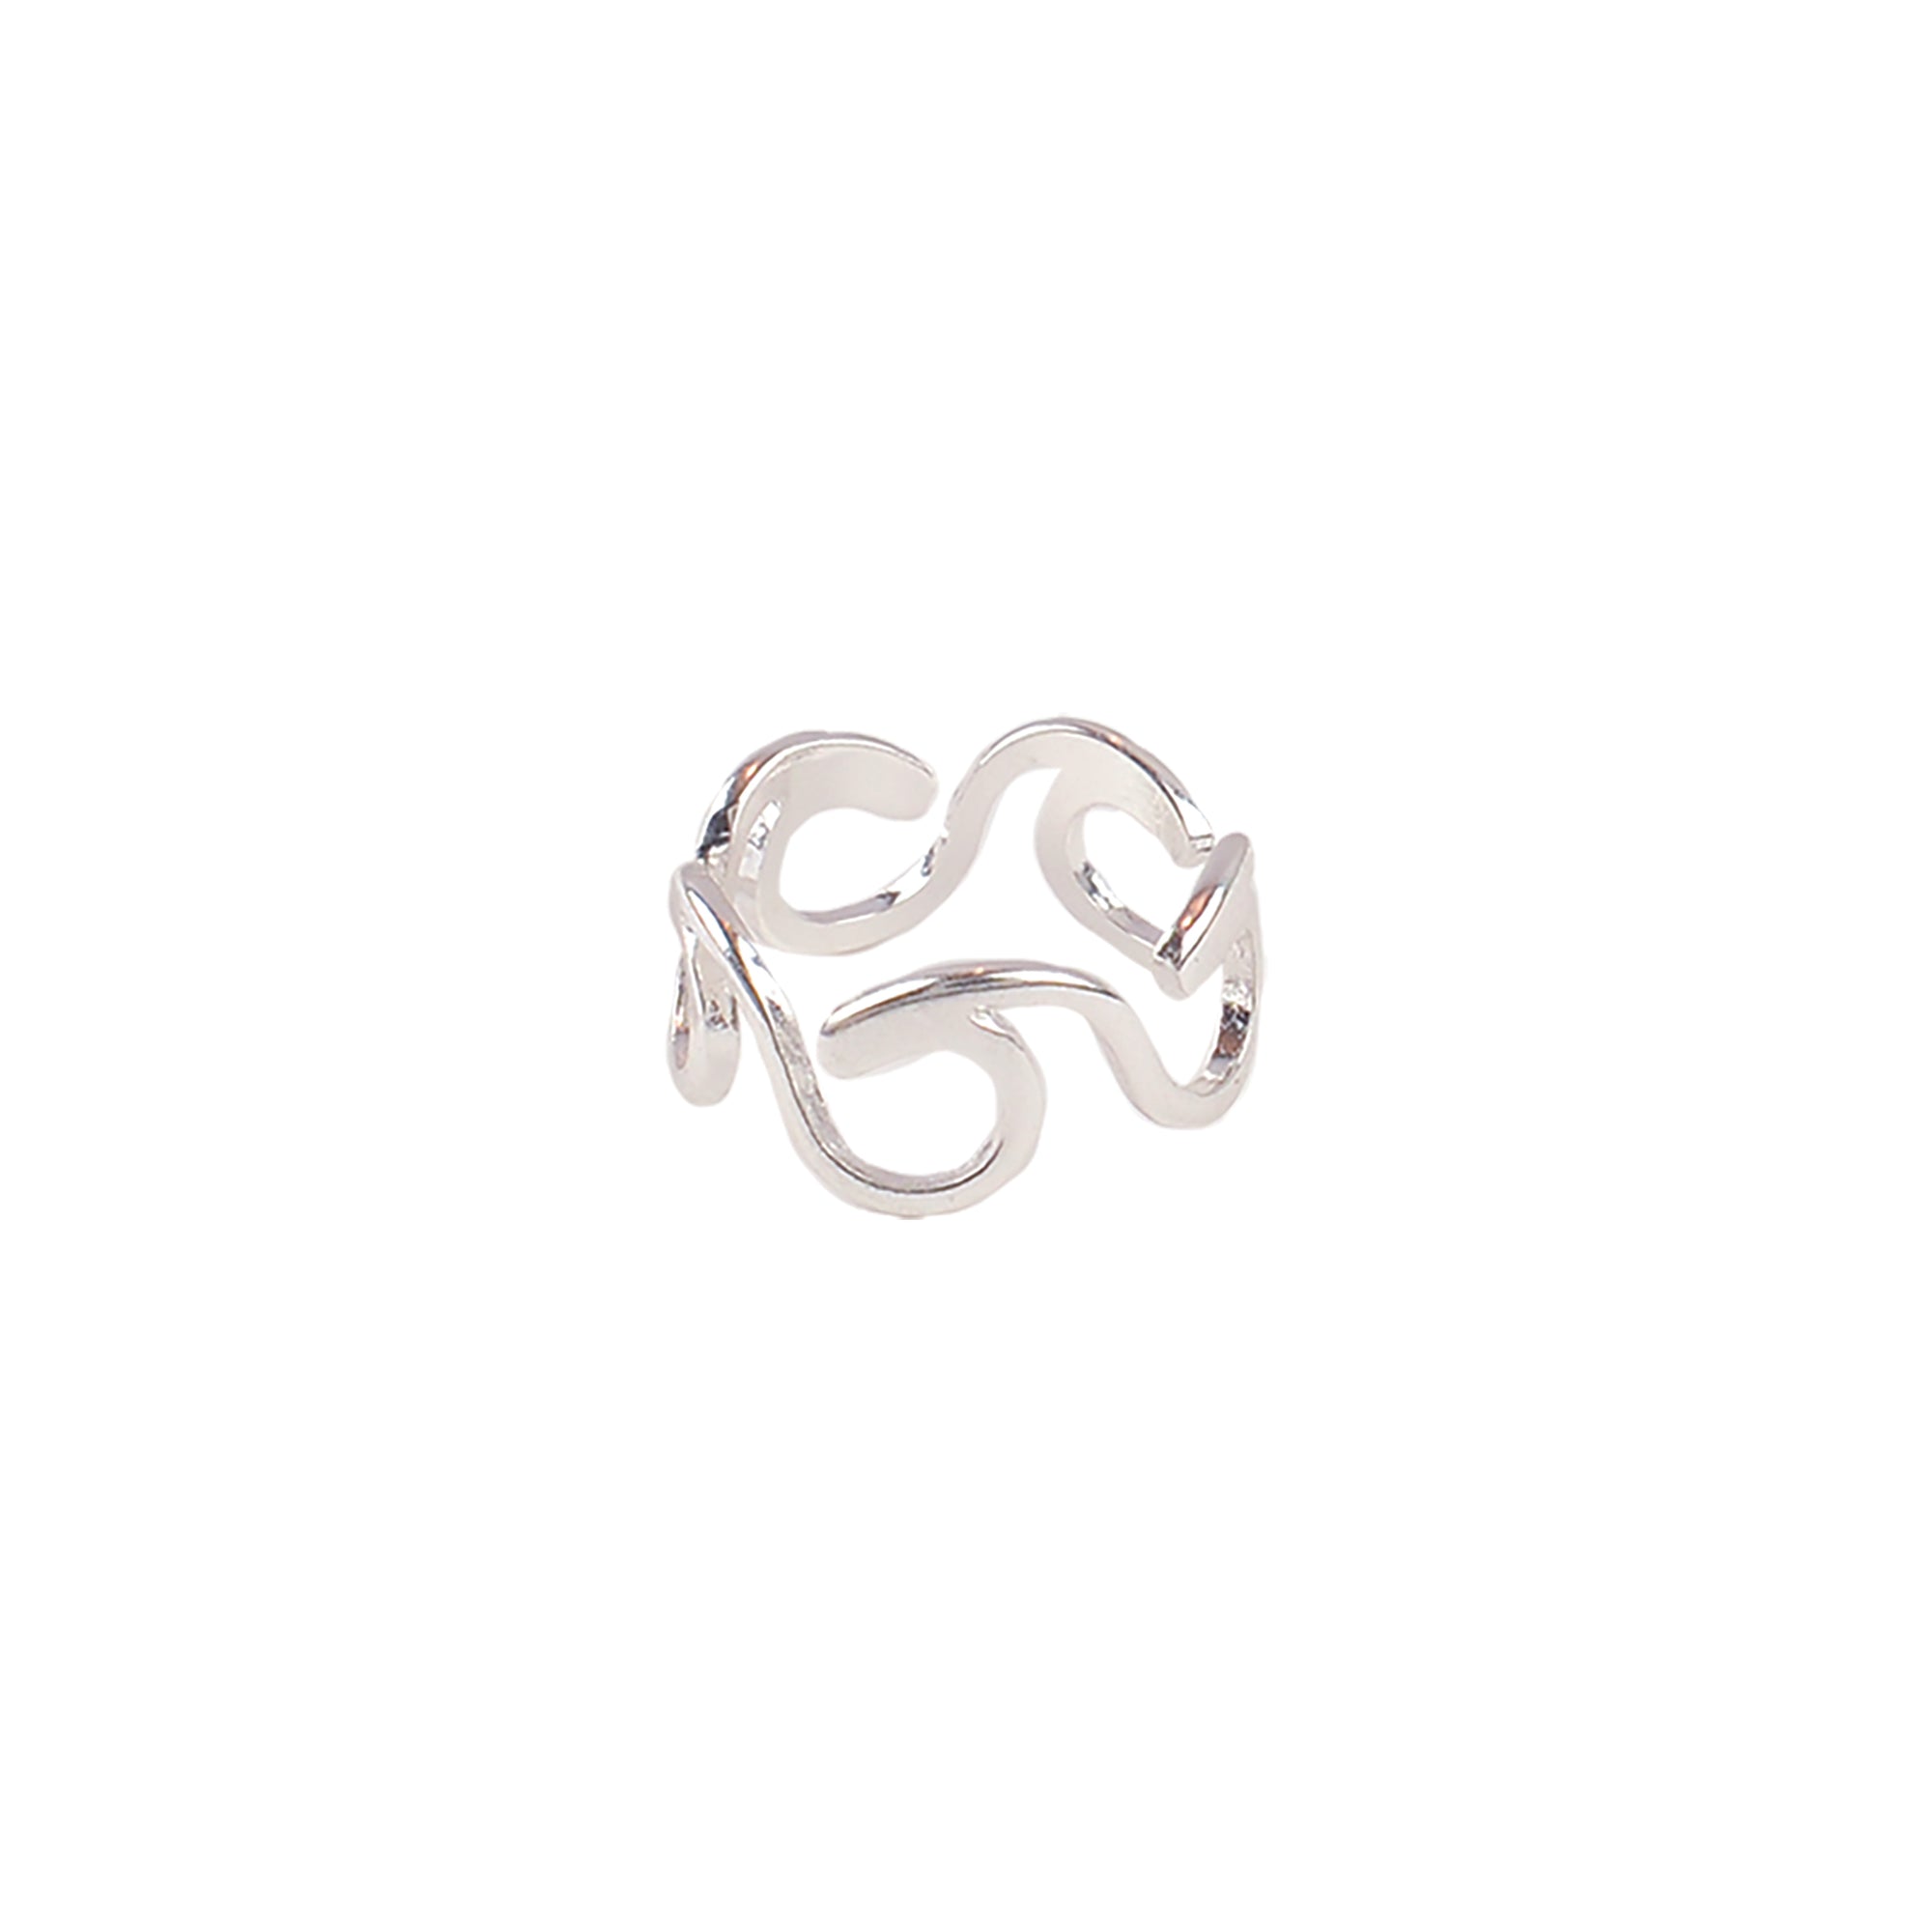 Band of Waves Ring - Viva life Jewellery